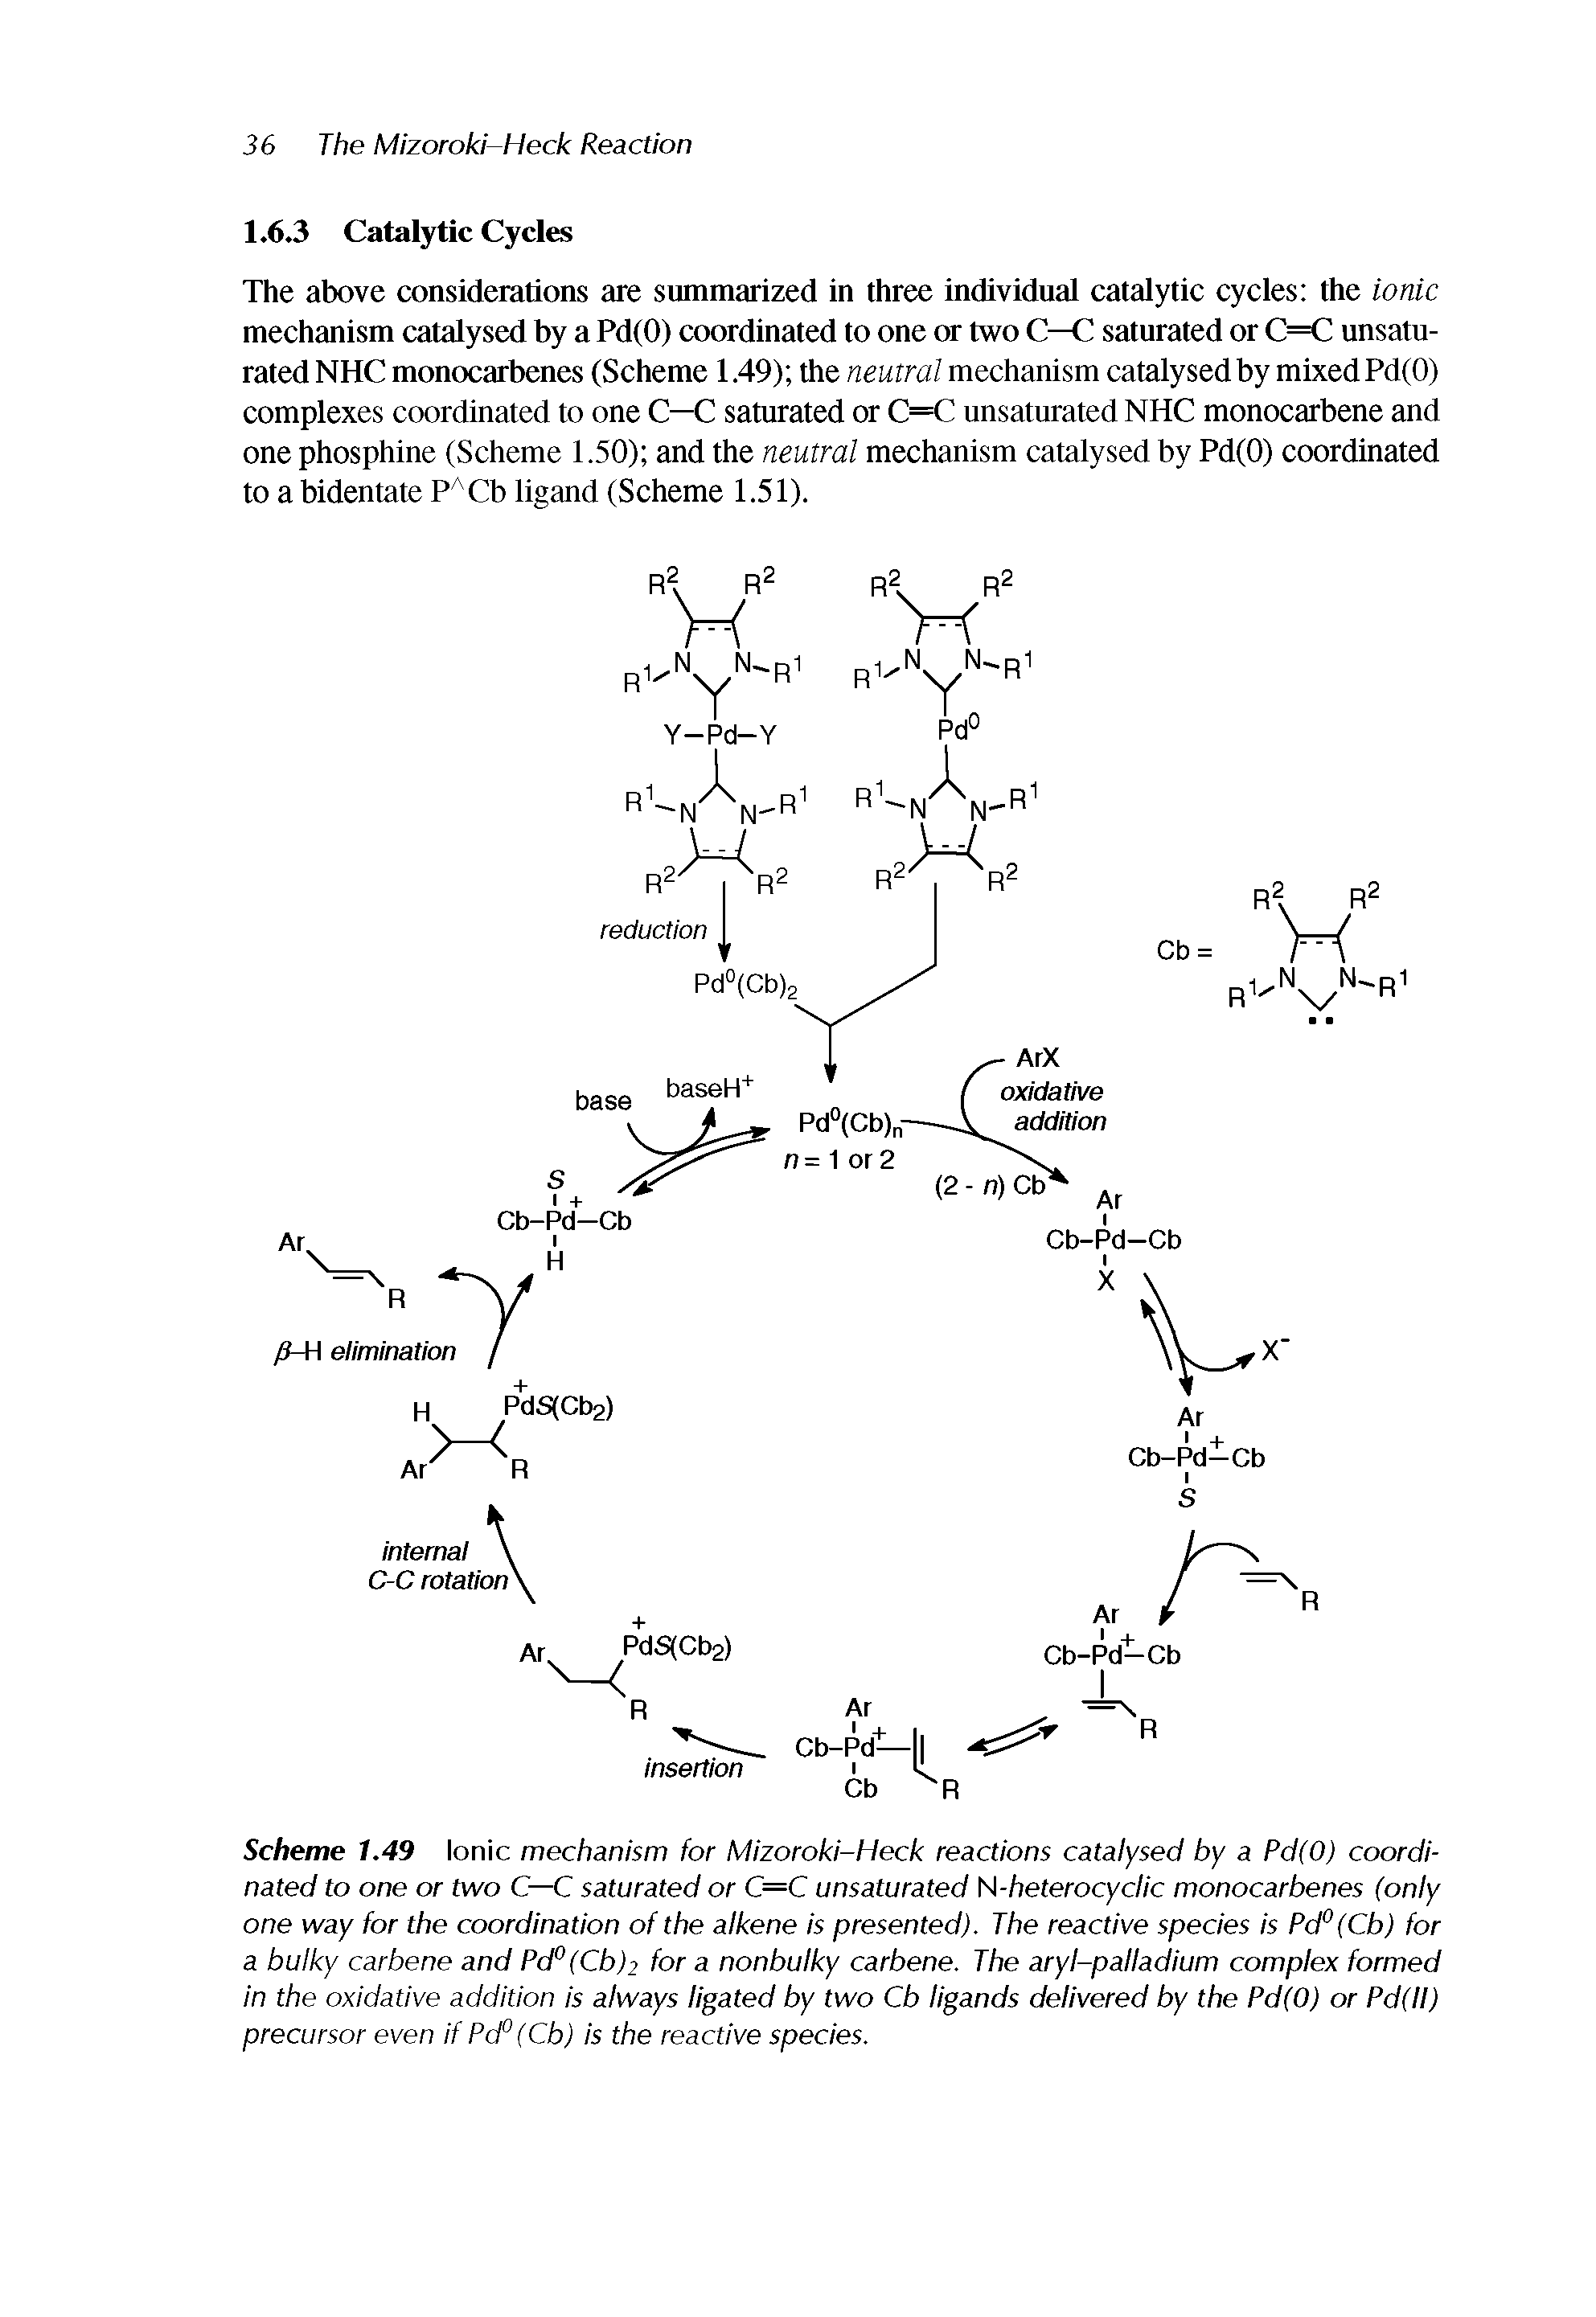 Scheme 1.49 Ionic mechanism for Mizoroki-Heck reactions catalysed by a Pd(0) coordinated to one or two C—C saturated or C=C unsaturated fi-heterocyclic monocarbenes (only one way for the coordination of the alkene is presented). The reactive species is PdP(Cb) for a bulky carbene and Prf(Cb)2 for a nonbulky carbene. The aryl-palladium complex formed in the oxidative addition is always ligated by two Cb ligands delivered by the Pd(0) or PdfII) precursor even if Pcf(Cb) is the reactive species.